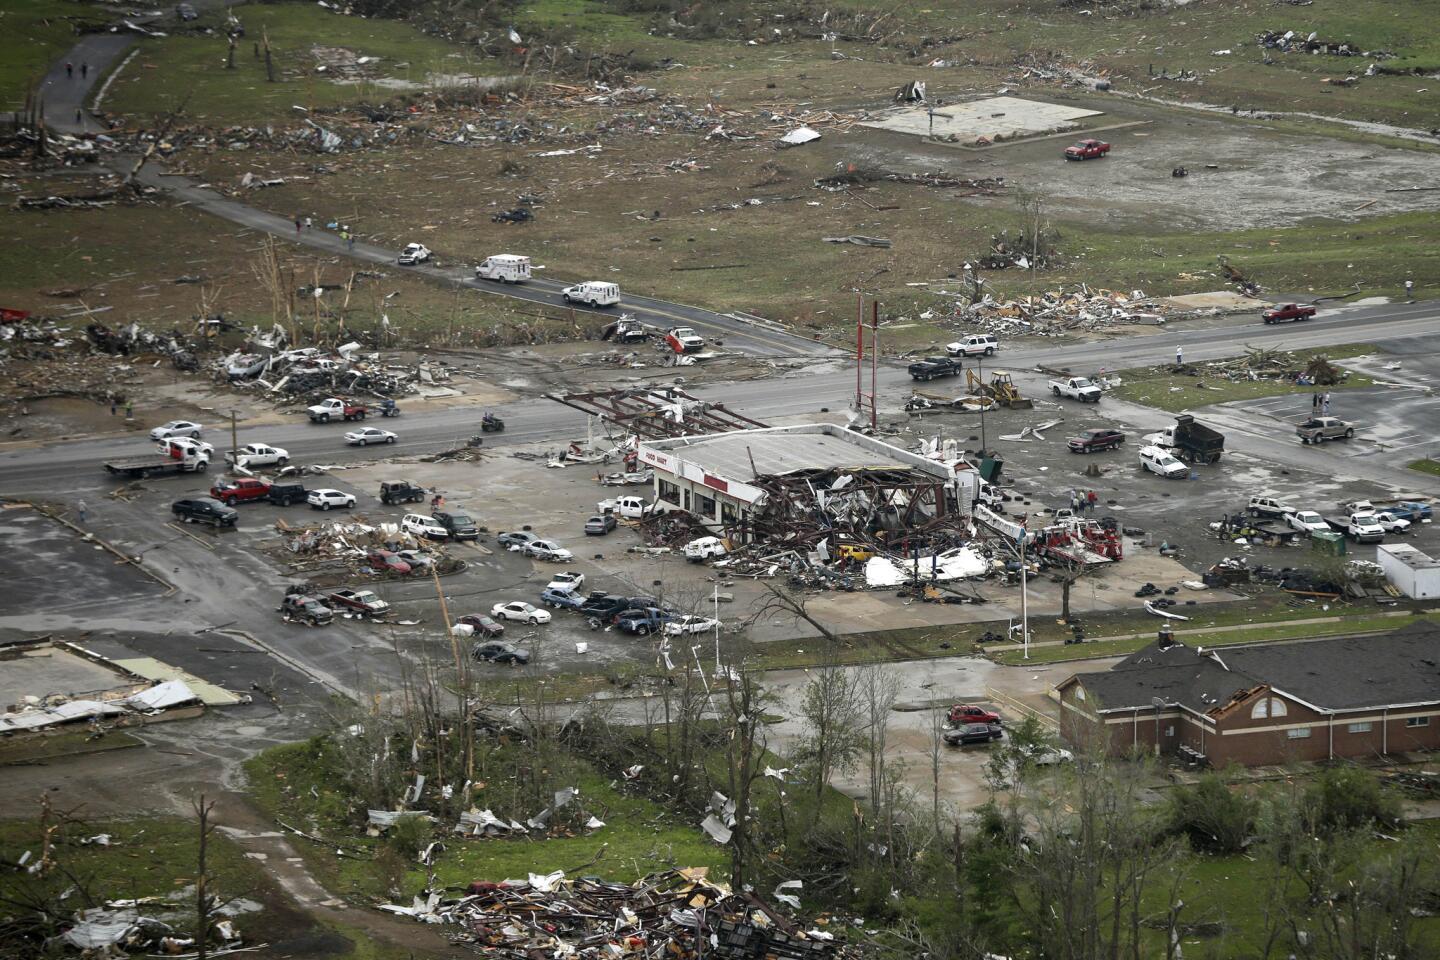 A storm-damaged convenience store, center, sits among rubble along U.S. Highway 64 in Vilonia, Ark.